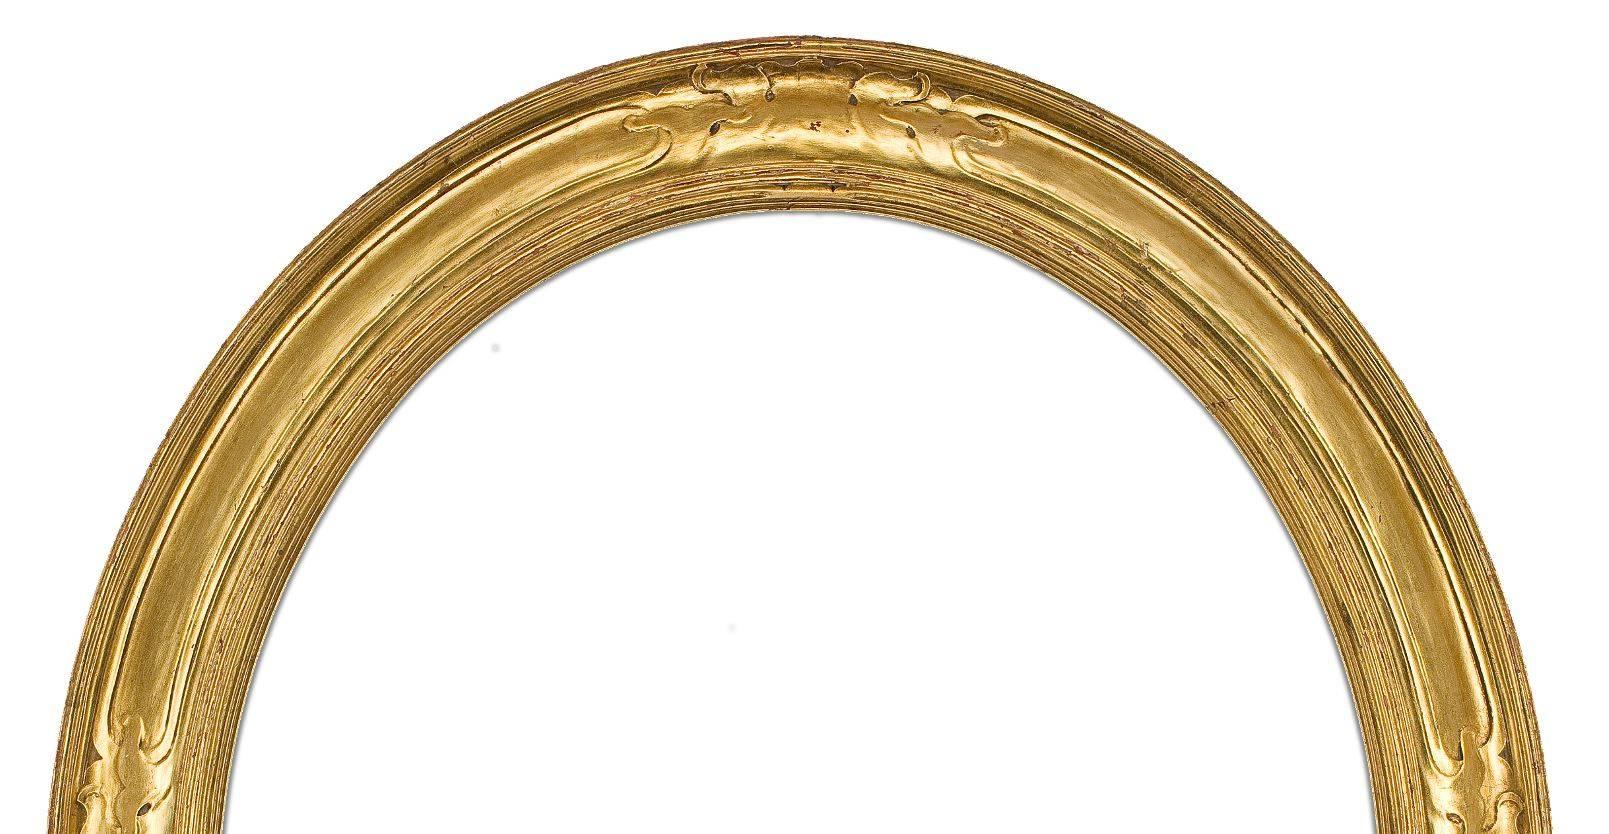 Hand-carved and gilt early 20th century mirror frame in the Art Nouveau style. This item was made by the Newcomb Macklin company.
Outside dimensions 29 1/4